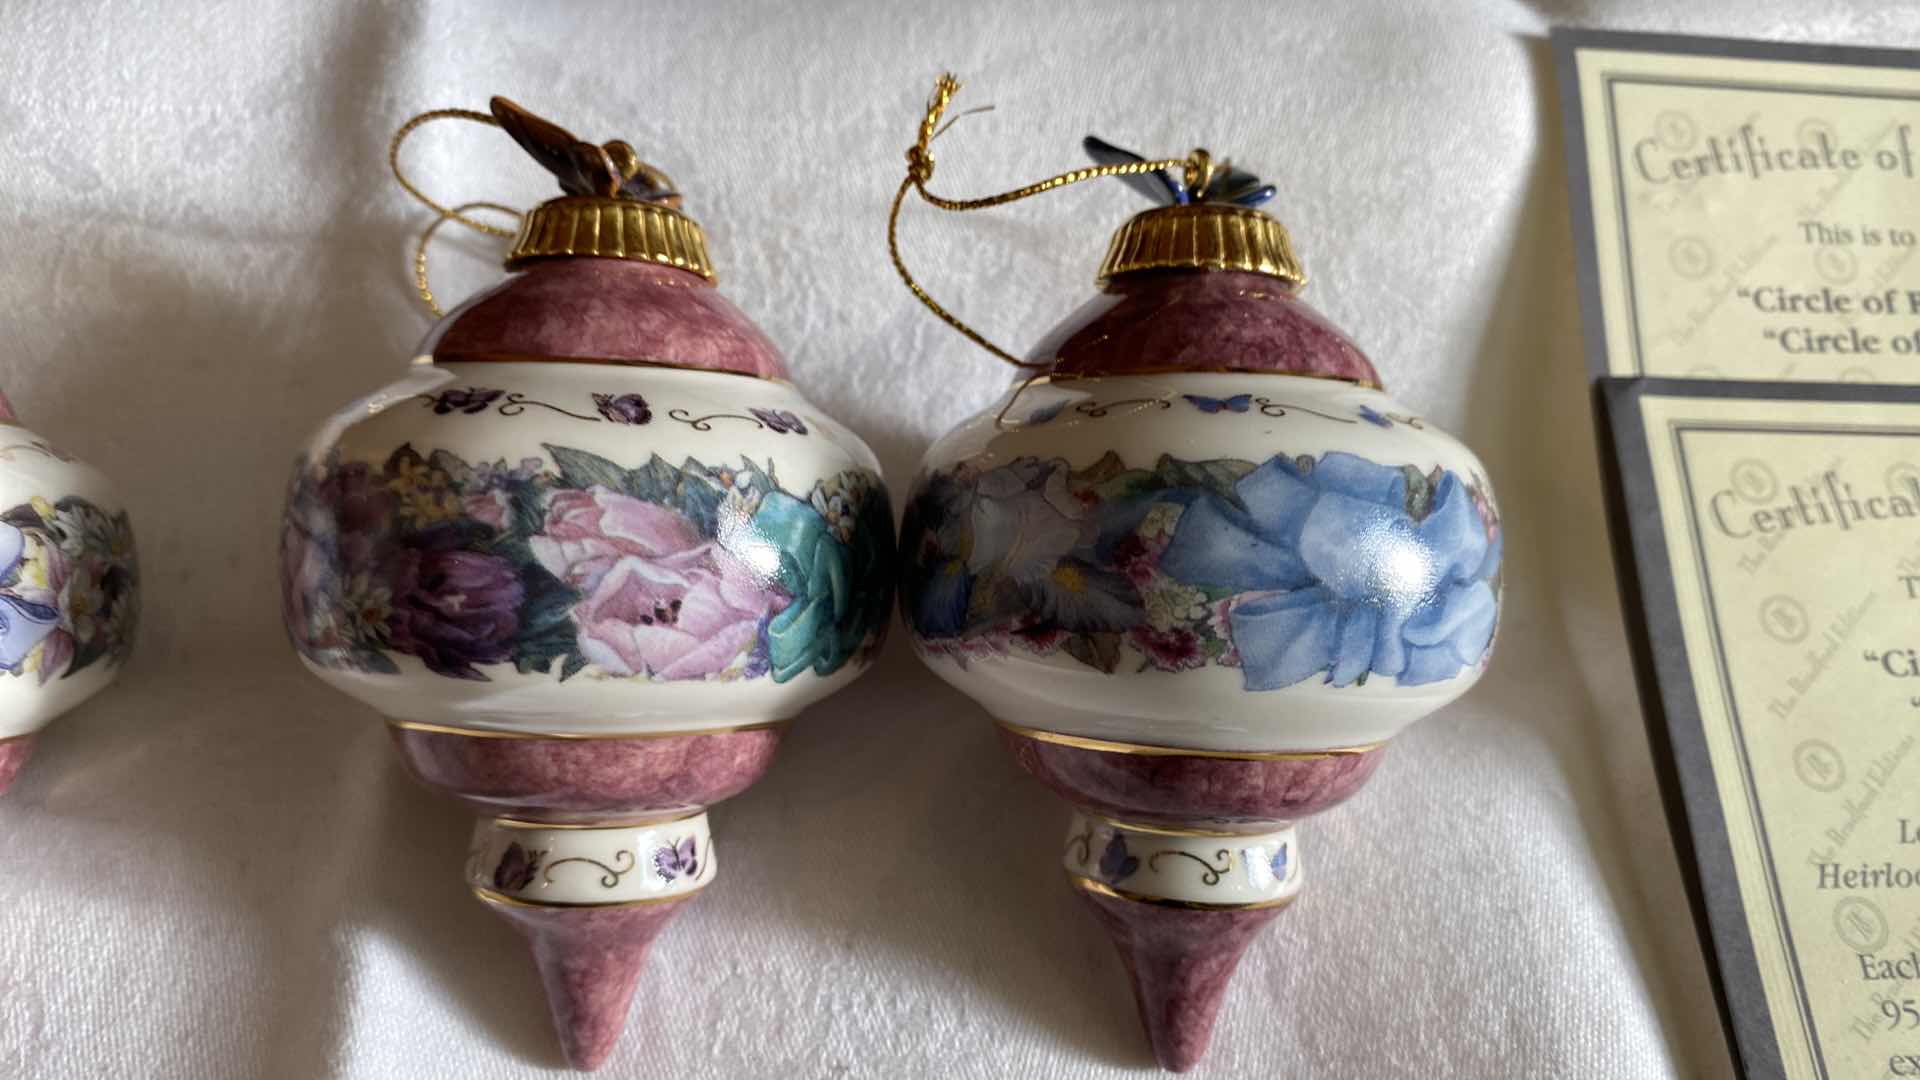 Photo 3 of VINTAGE FOUR LENA LIU’s FLORAL INSPIRATIONS PORCELAIN ORNAMENTS COLLECTIBLES BY BRADFORD EXCHANGE WITH 2 CERTIFICATE OF AUTHENTICITY (Pattern on certificate may not be correct)